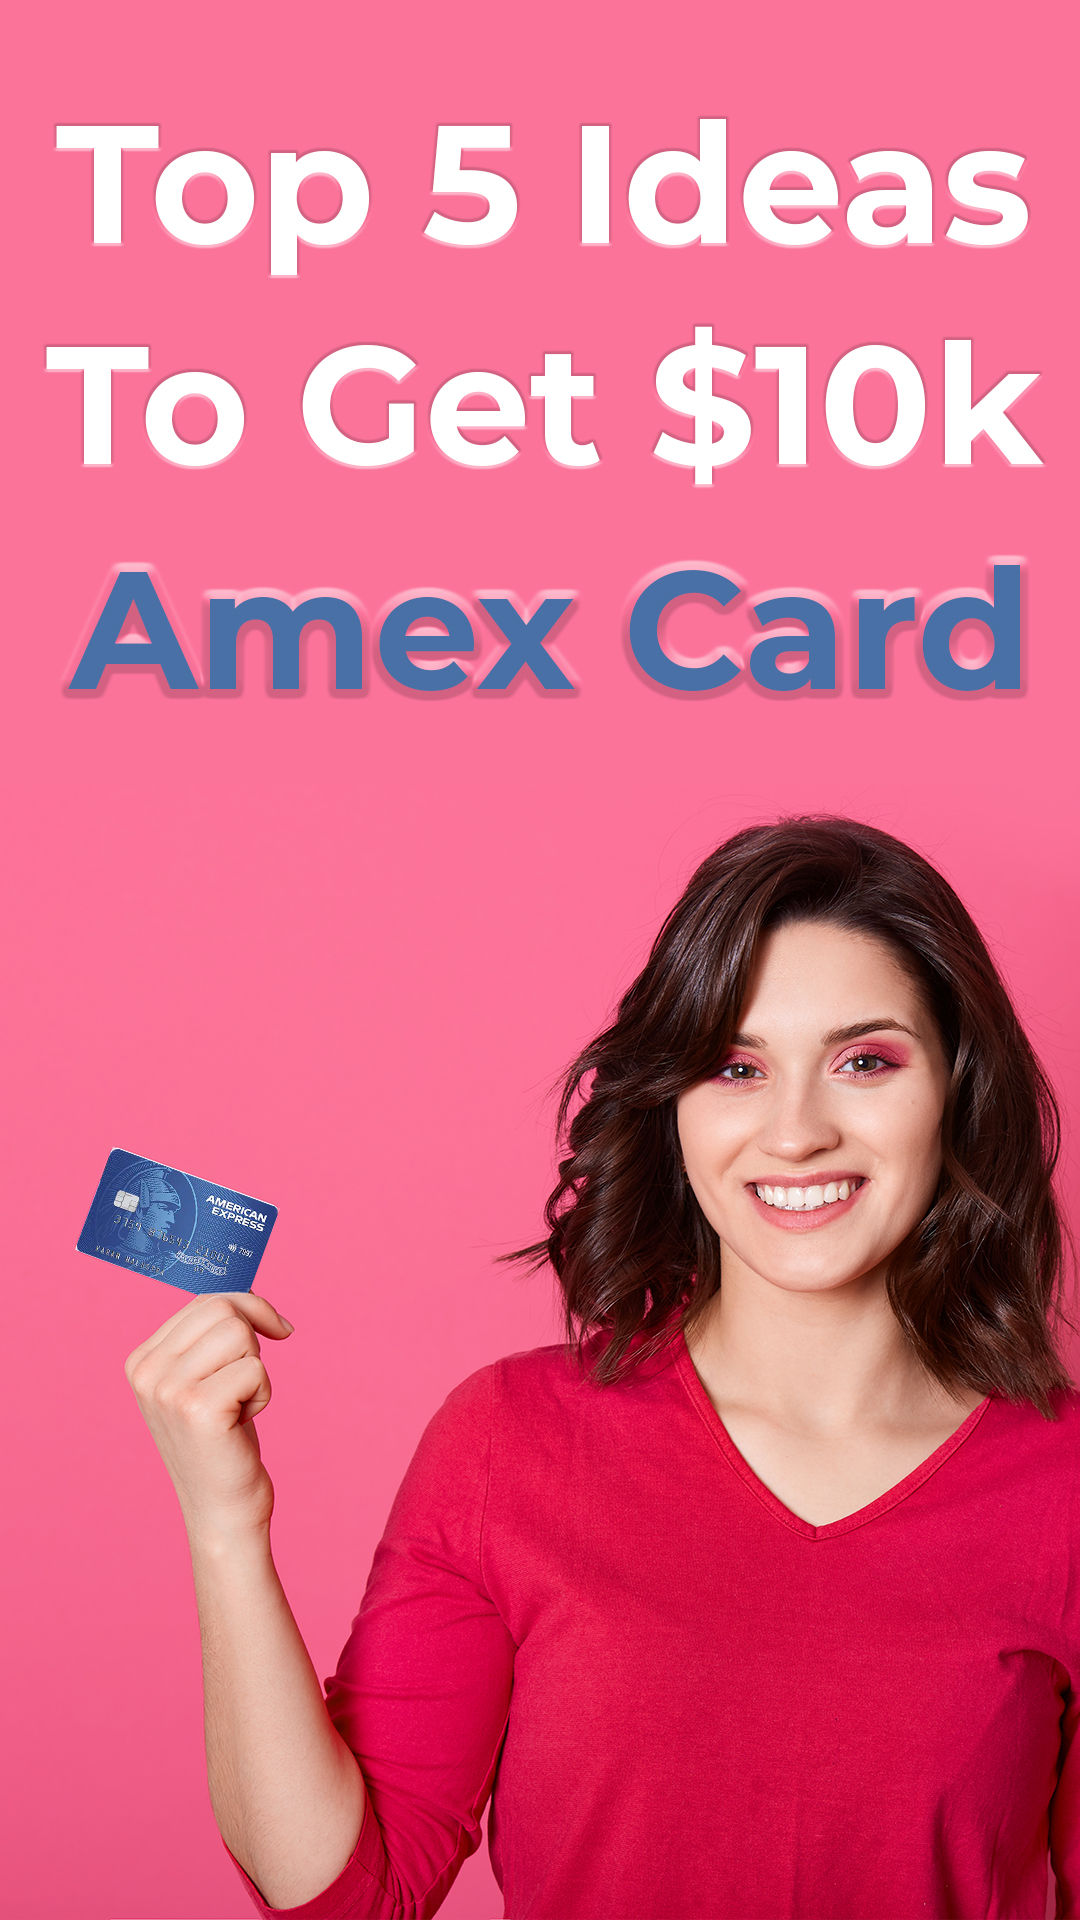 TOP 5 IDEAS TO GET $10K AMERICAN EXPRESS BUSINESS CREDIT CARD - Houston Mcmiller